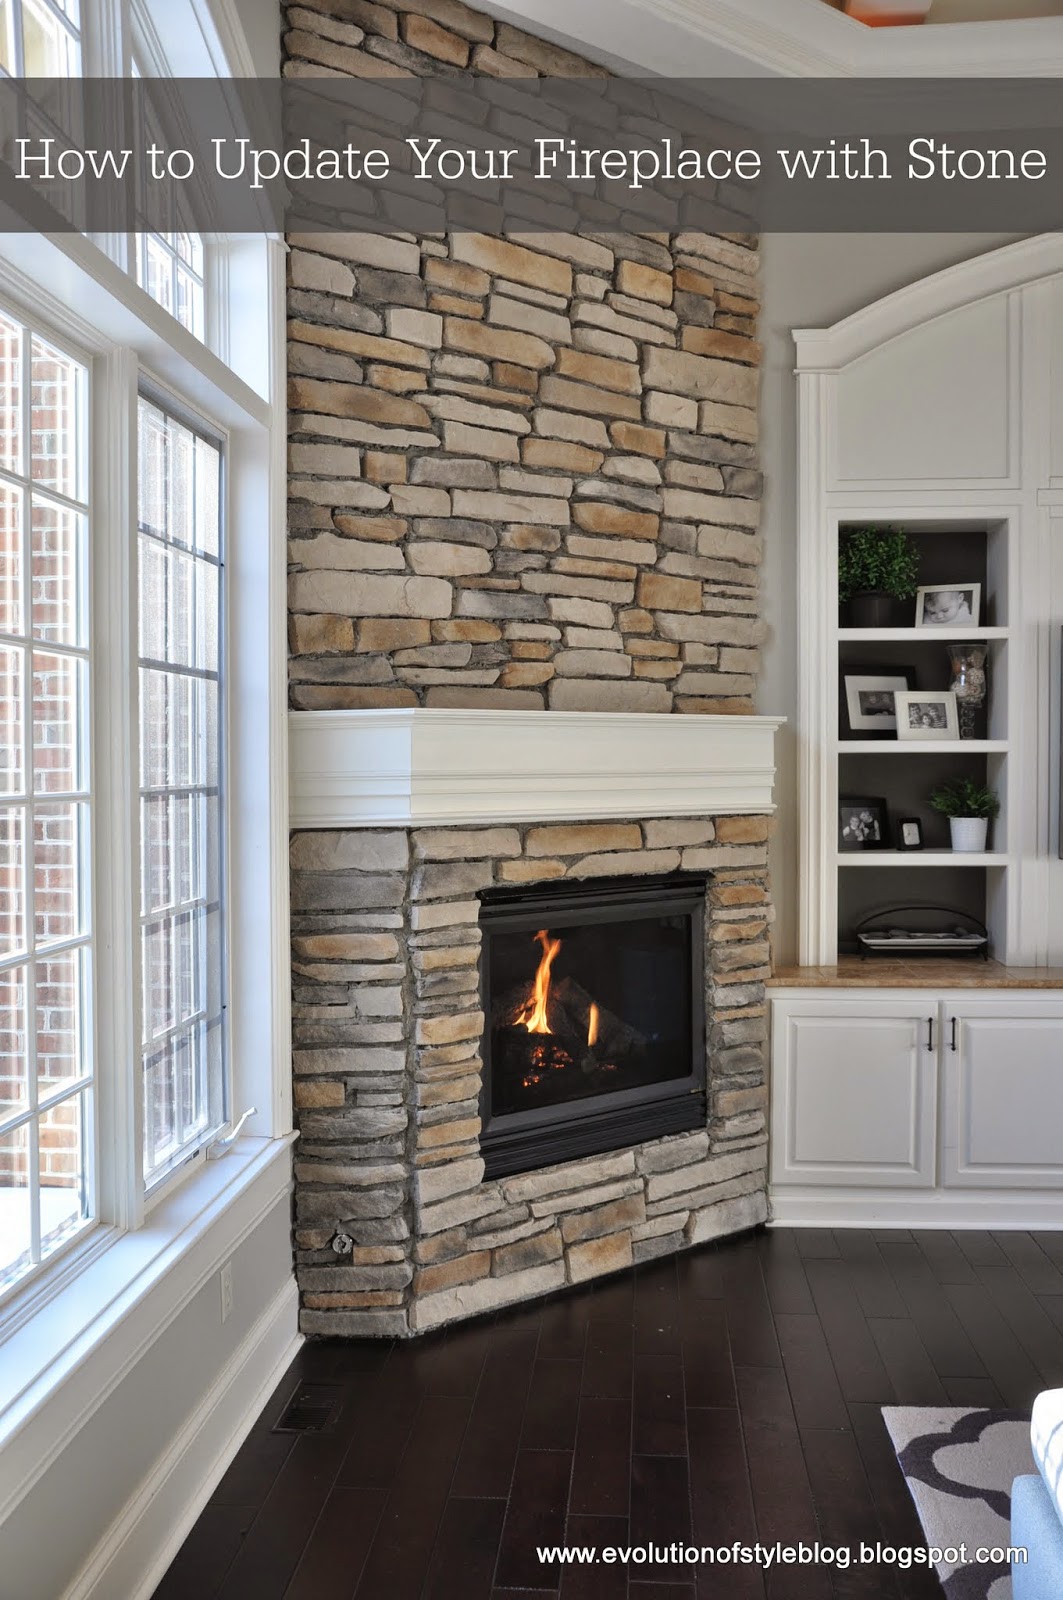 Reface Fireplace before and after Unique How to Update Your Fireplace with Stone Evolution Of Style